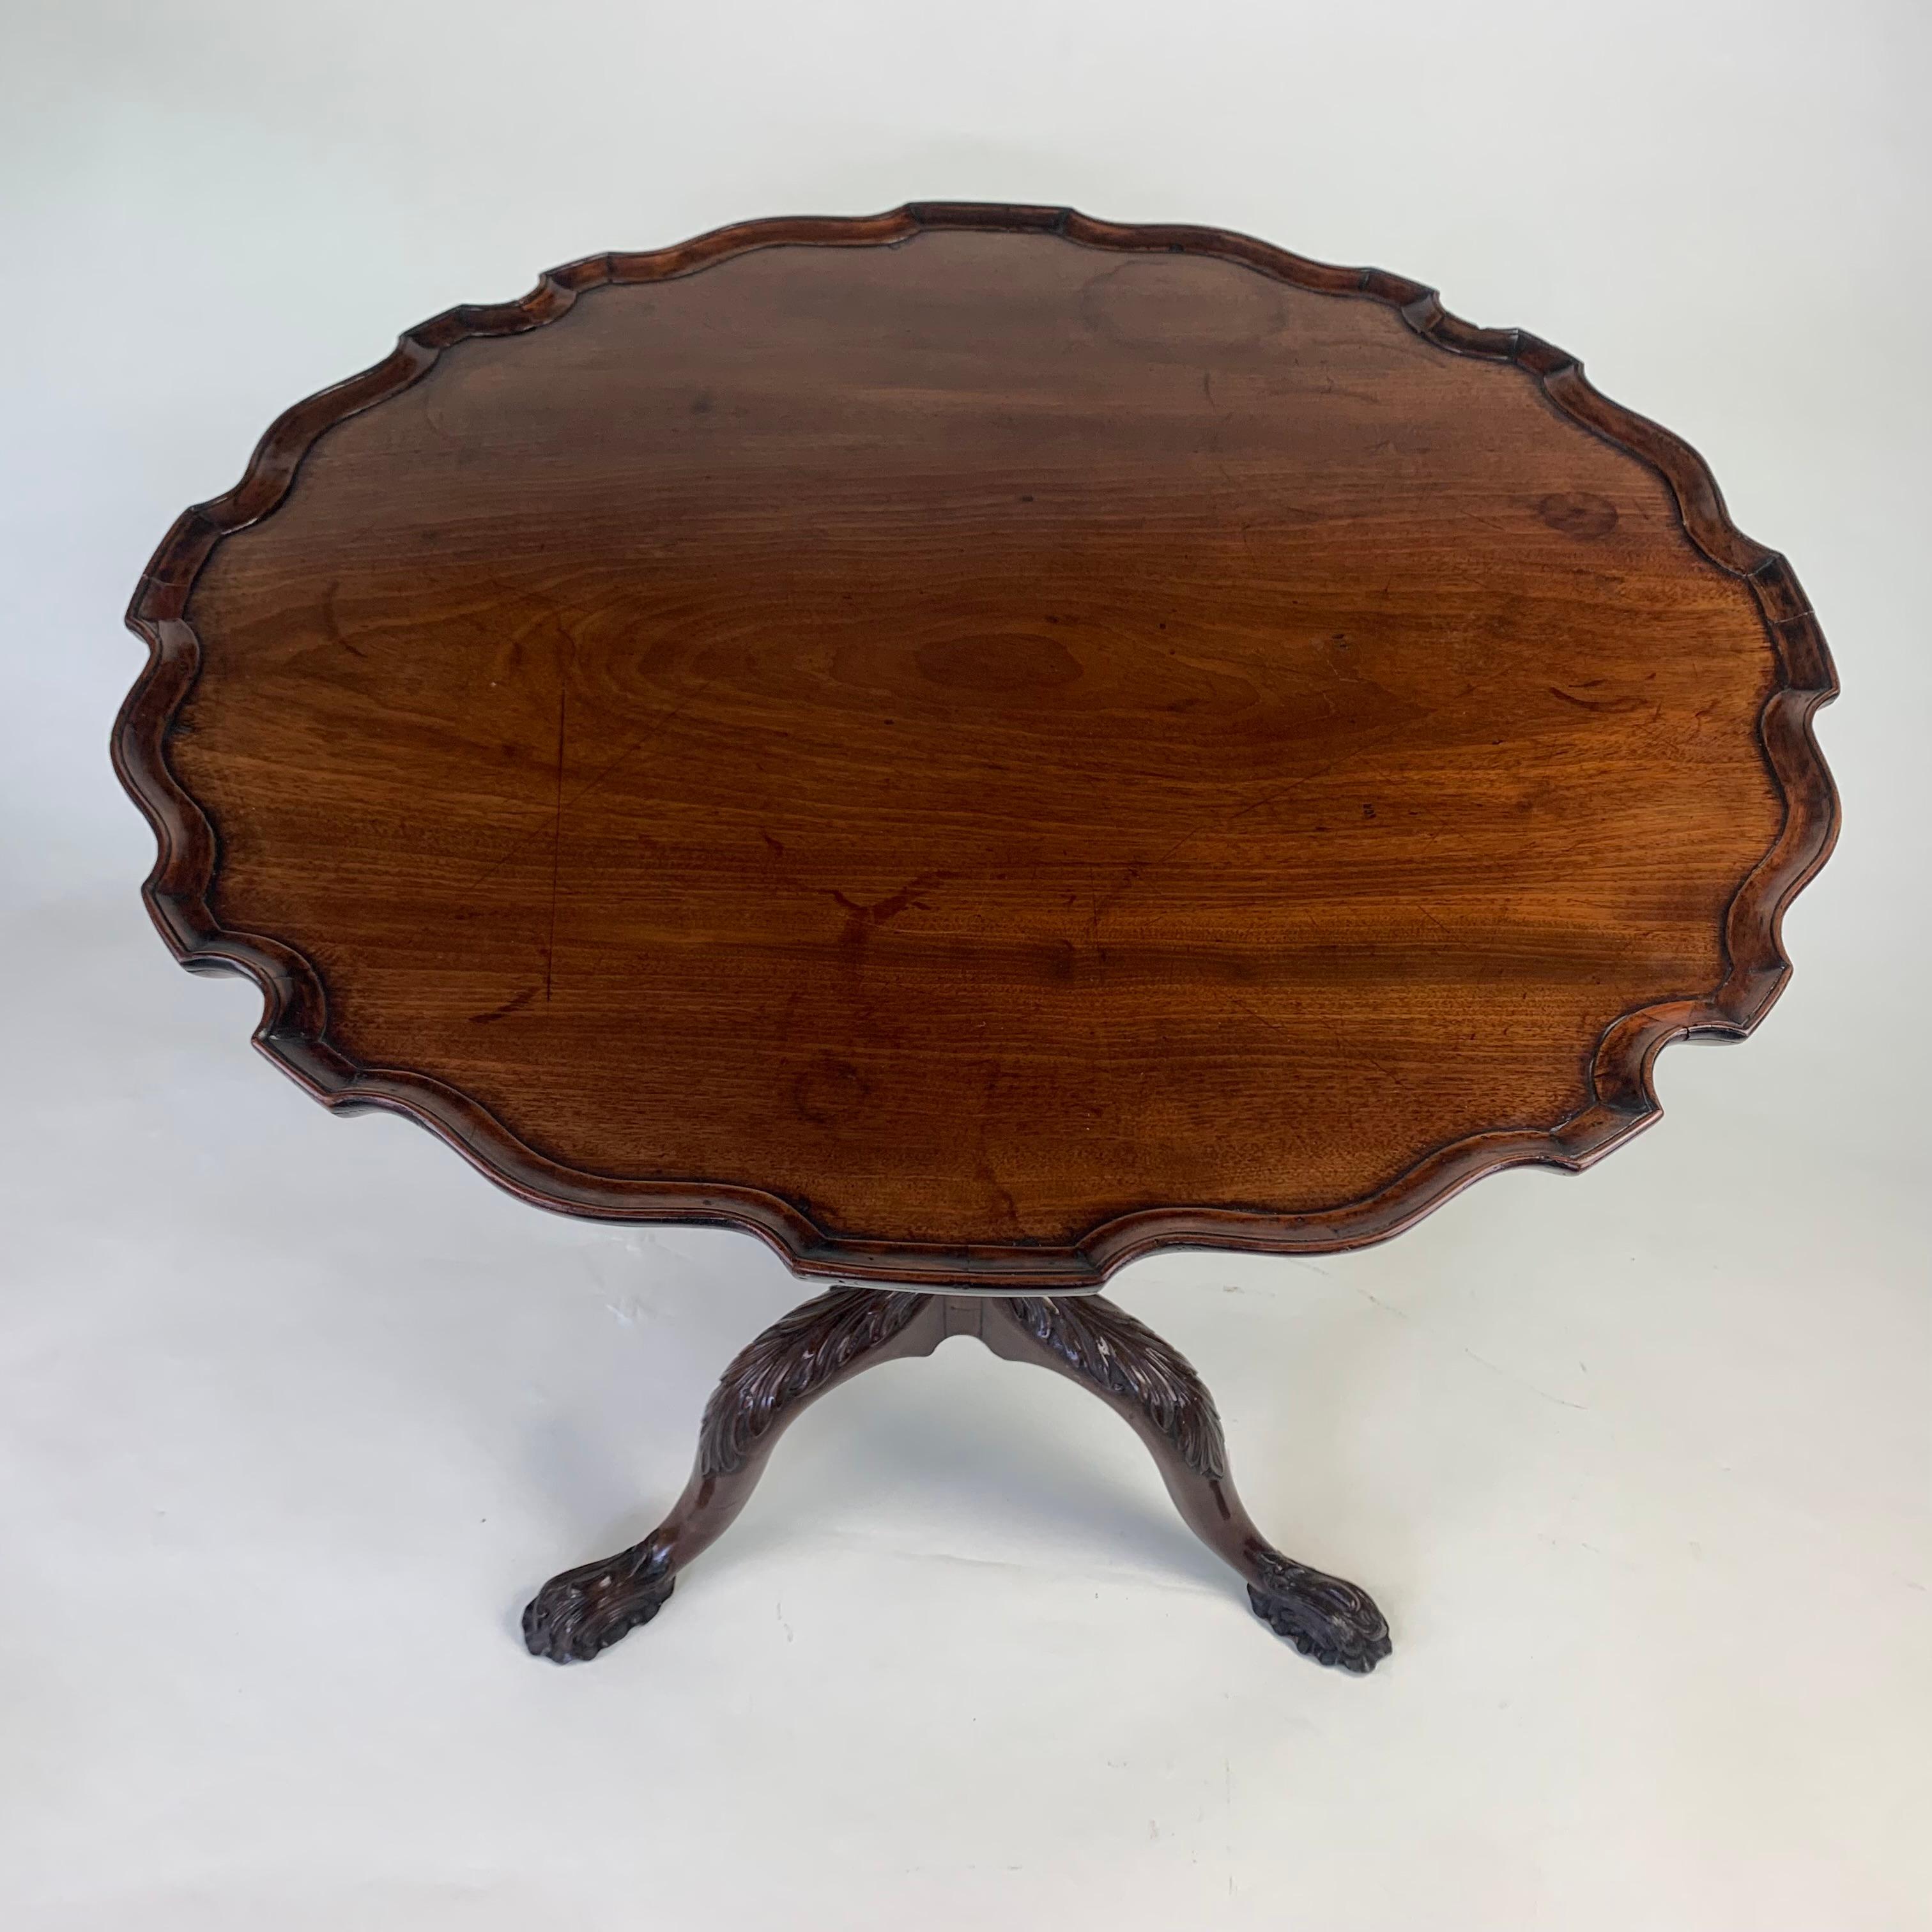 English Georgian Mahogany Carved Tripod Table with Piecrust Top For Sale